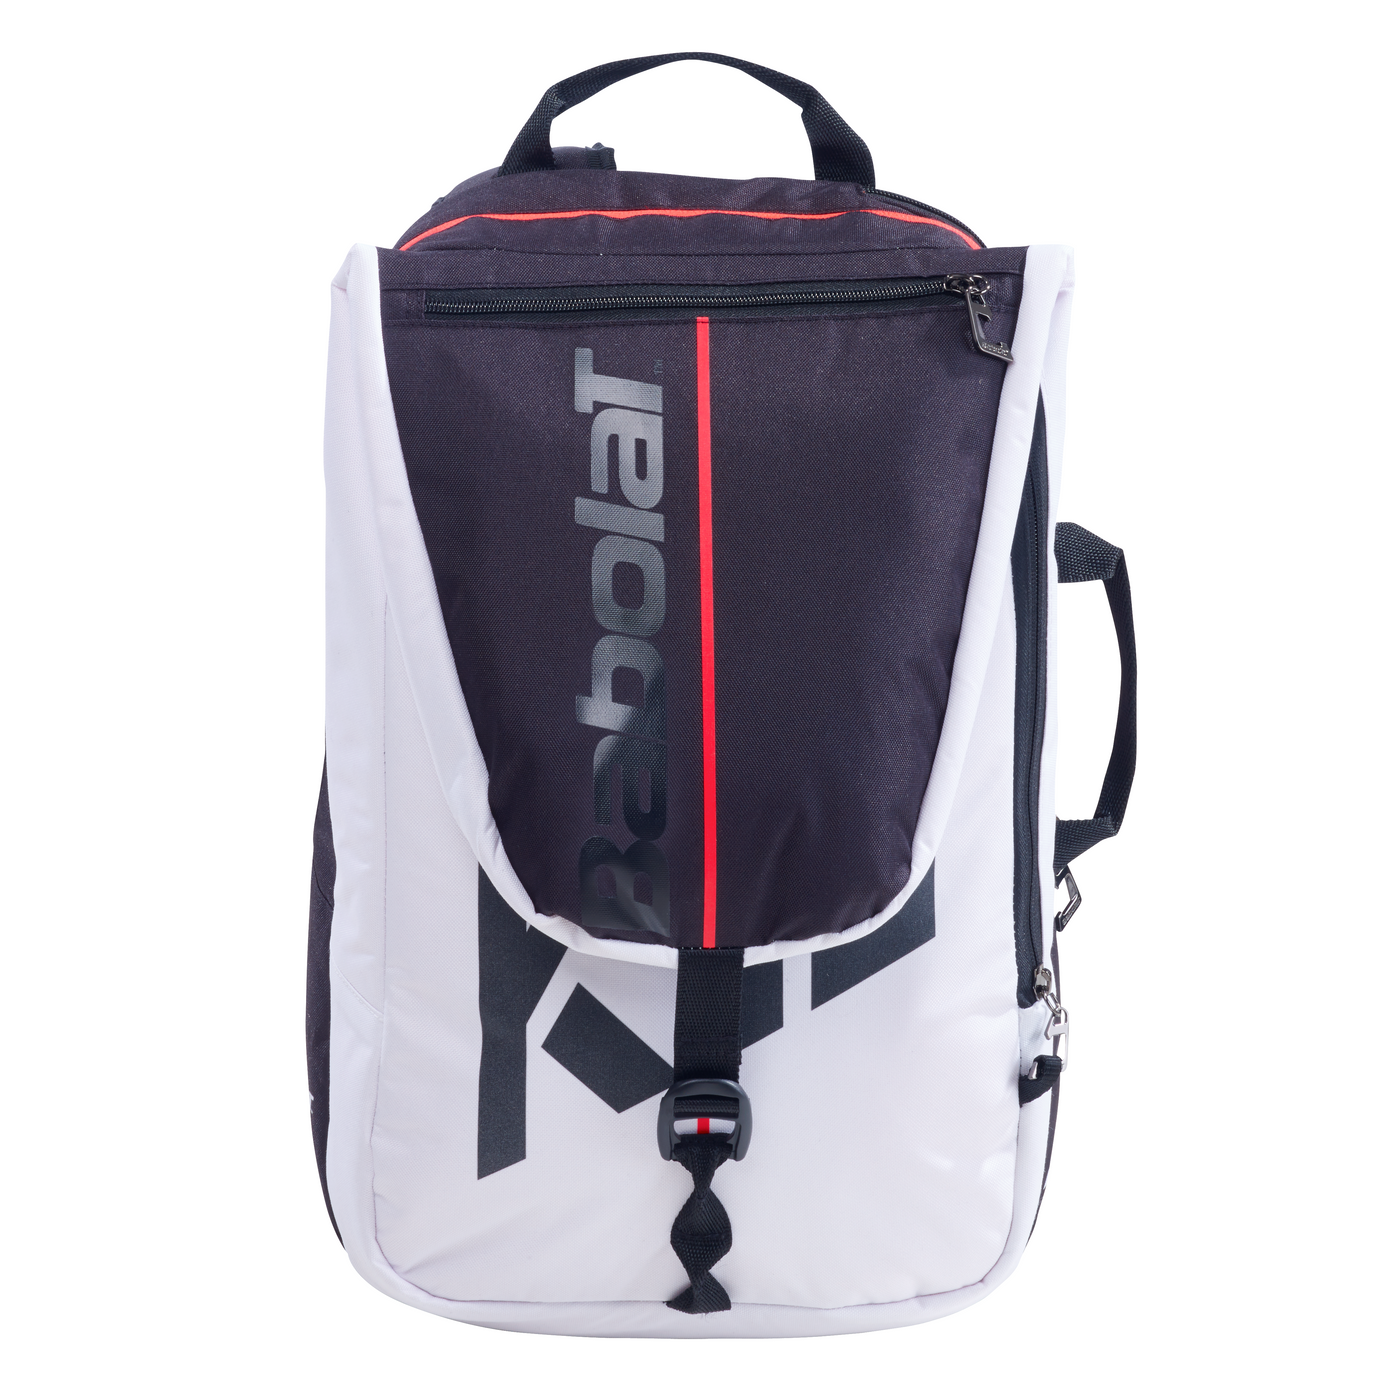 BABOLAT PURE STRIKE 2020 BACKPACK - WHITE/RED